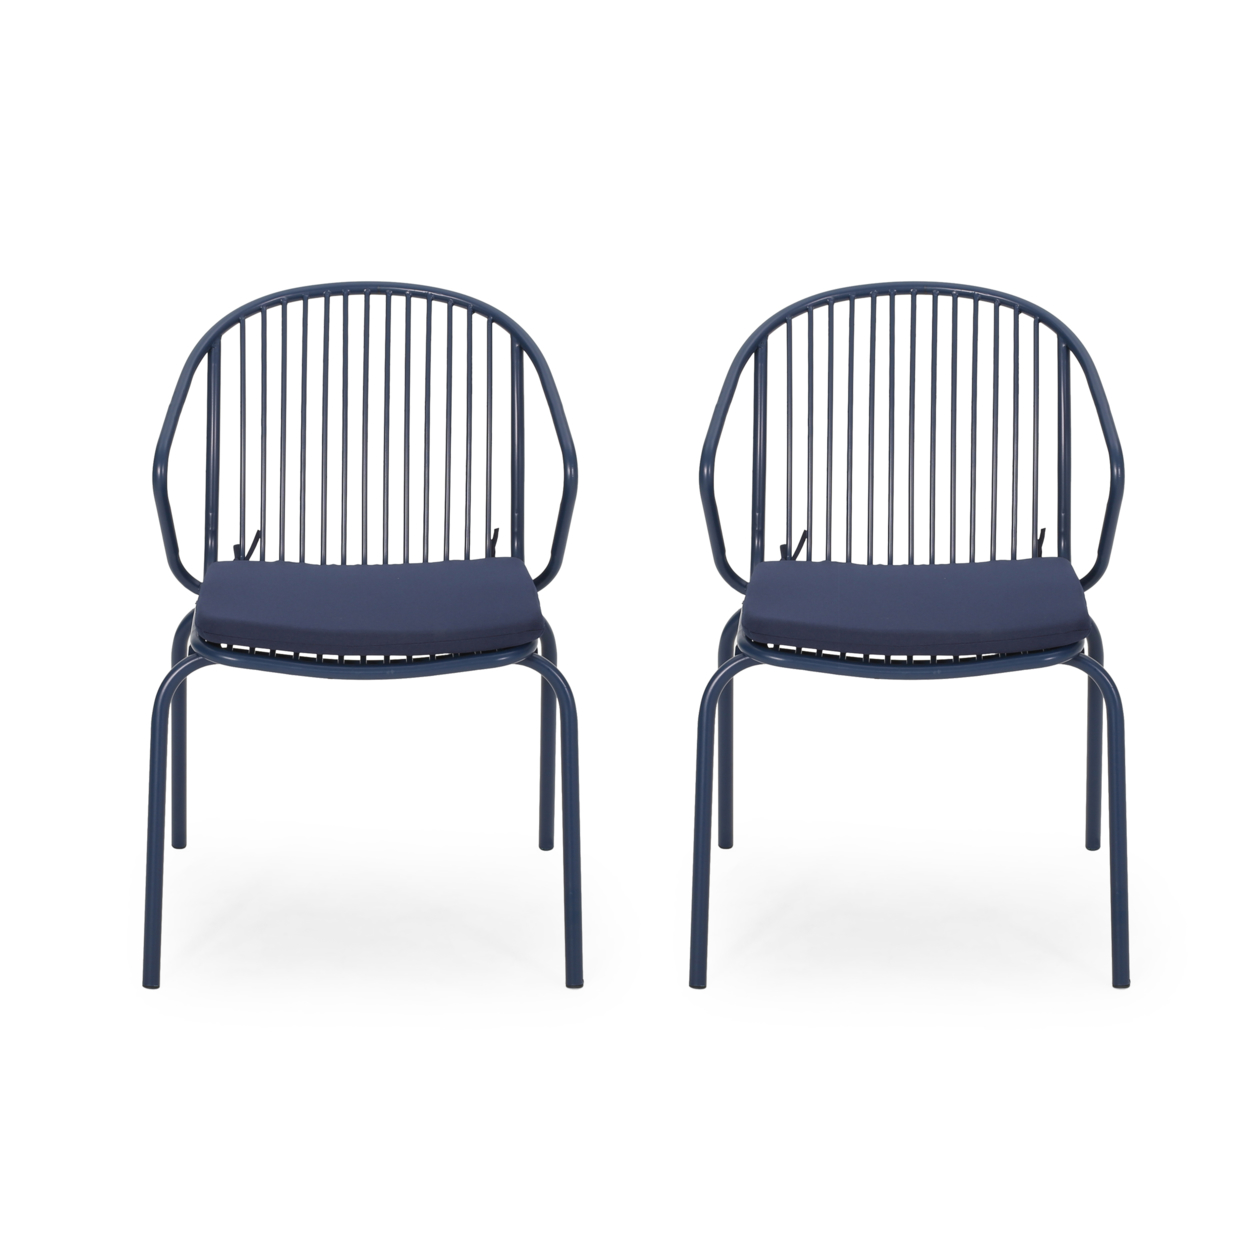 Sarah Outdoor Modern Iron Club Chair With Cushion (Set Of 2) - Navy Blue